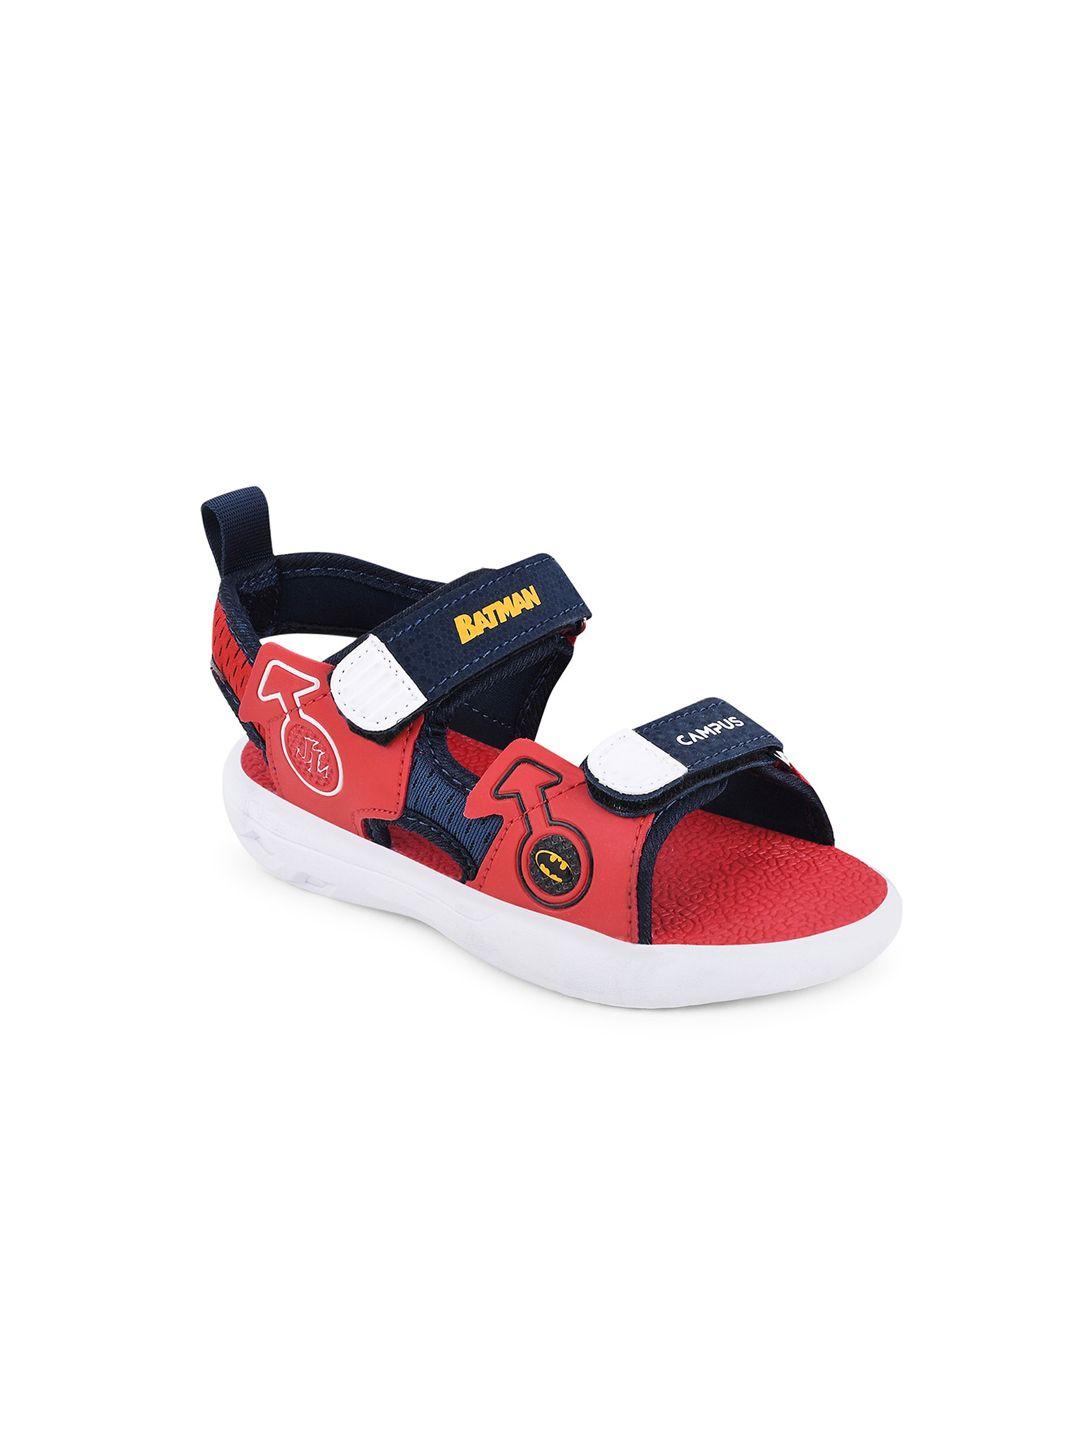 campus kids blue & red printed sports sandals